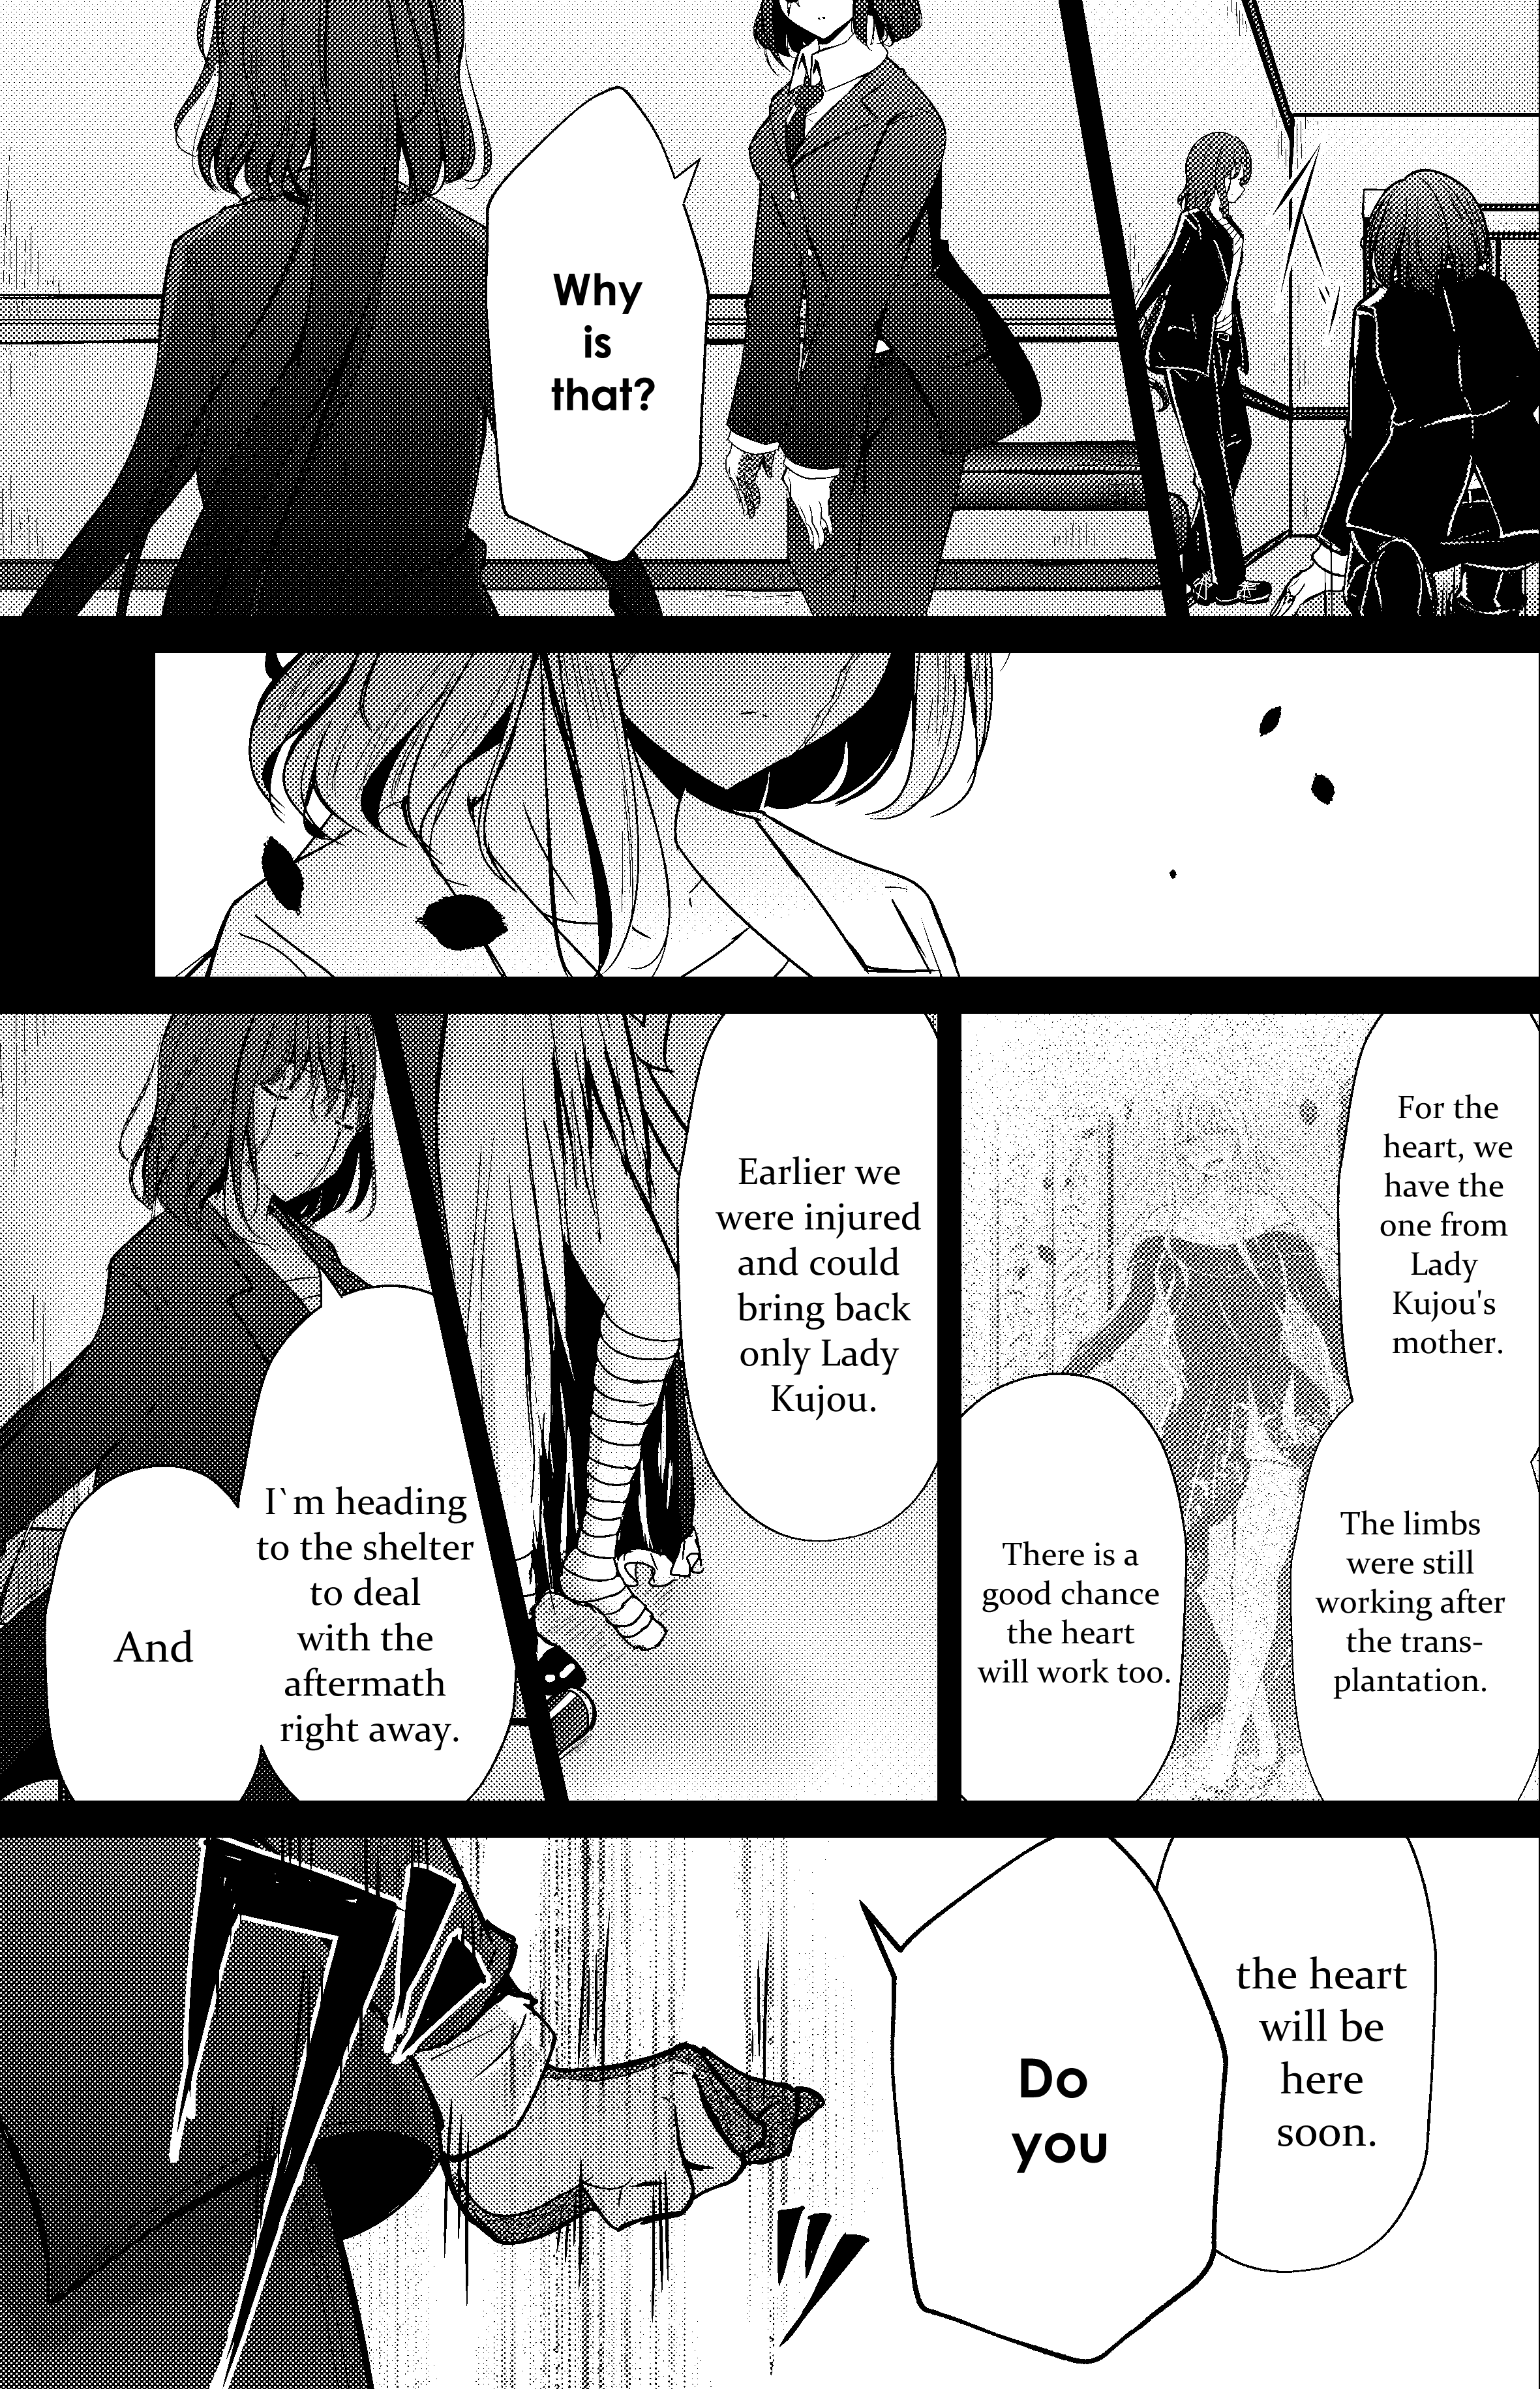 And Kaede Blooms Gorgeously - Page 1